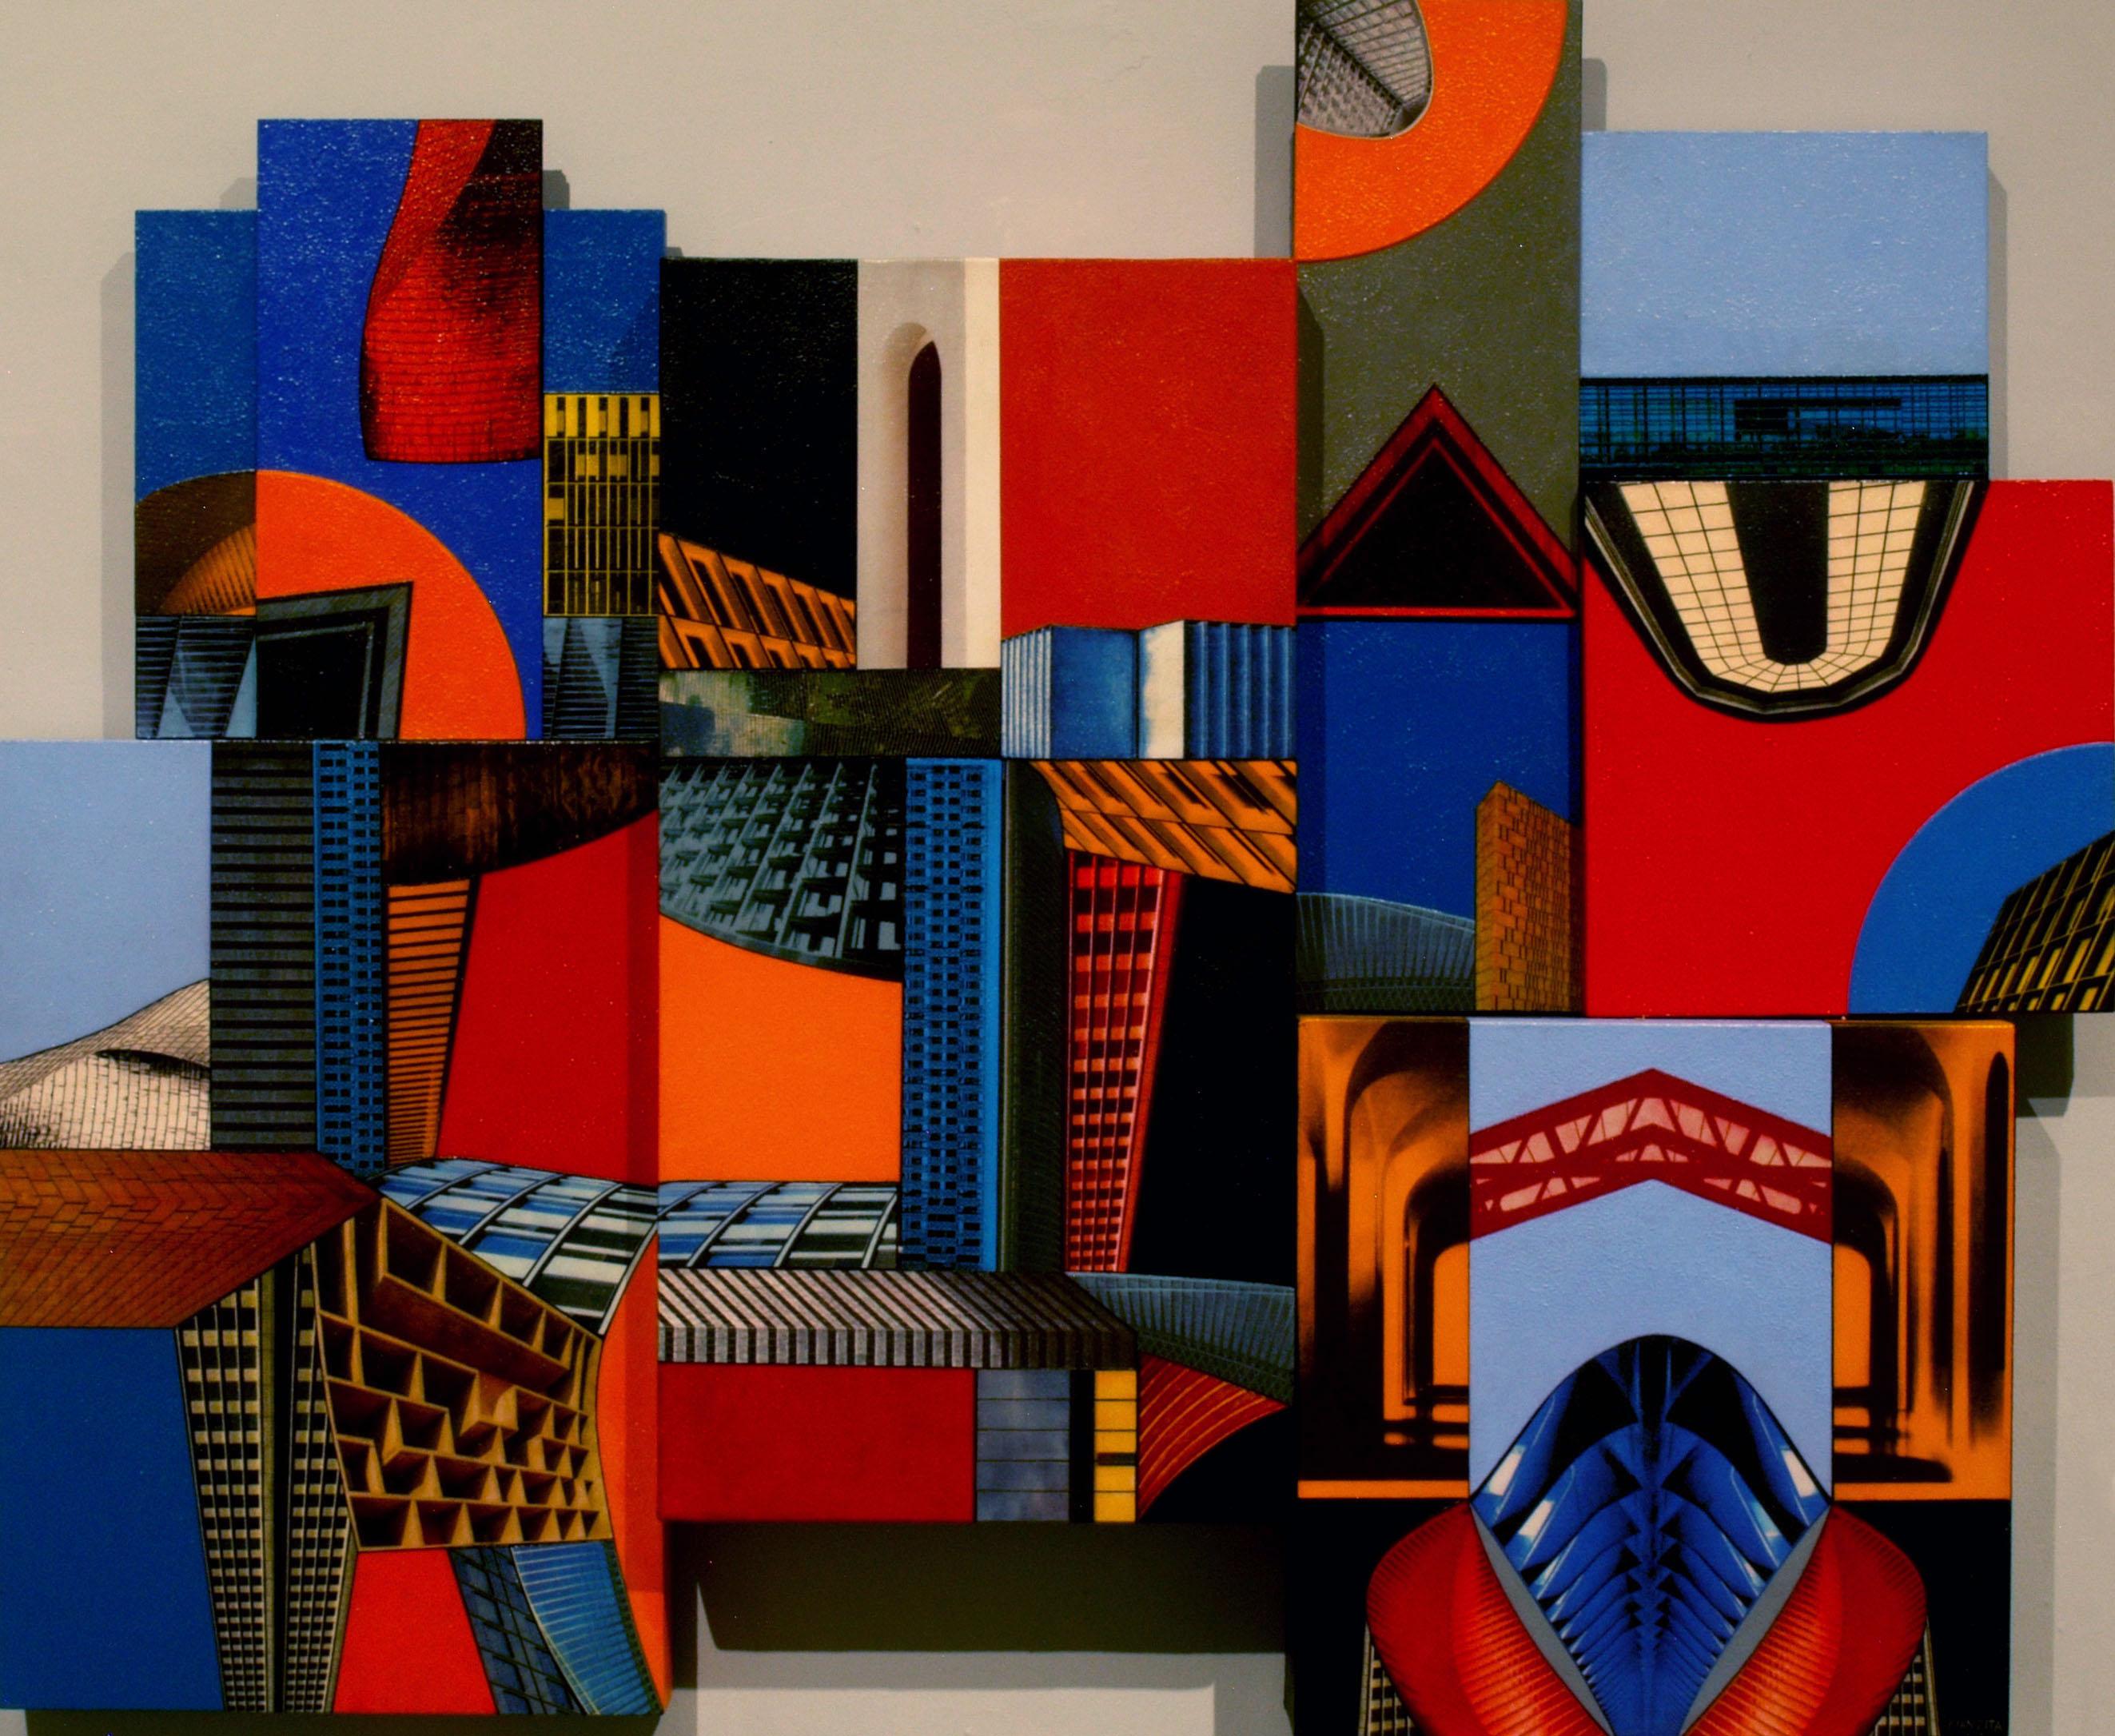 Cyberurban 3D (L3). Futurist colorful abstract constructivist painting